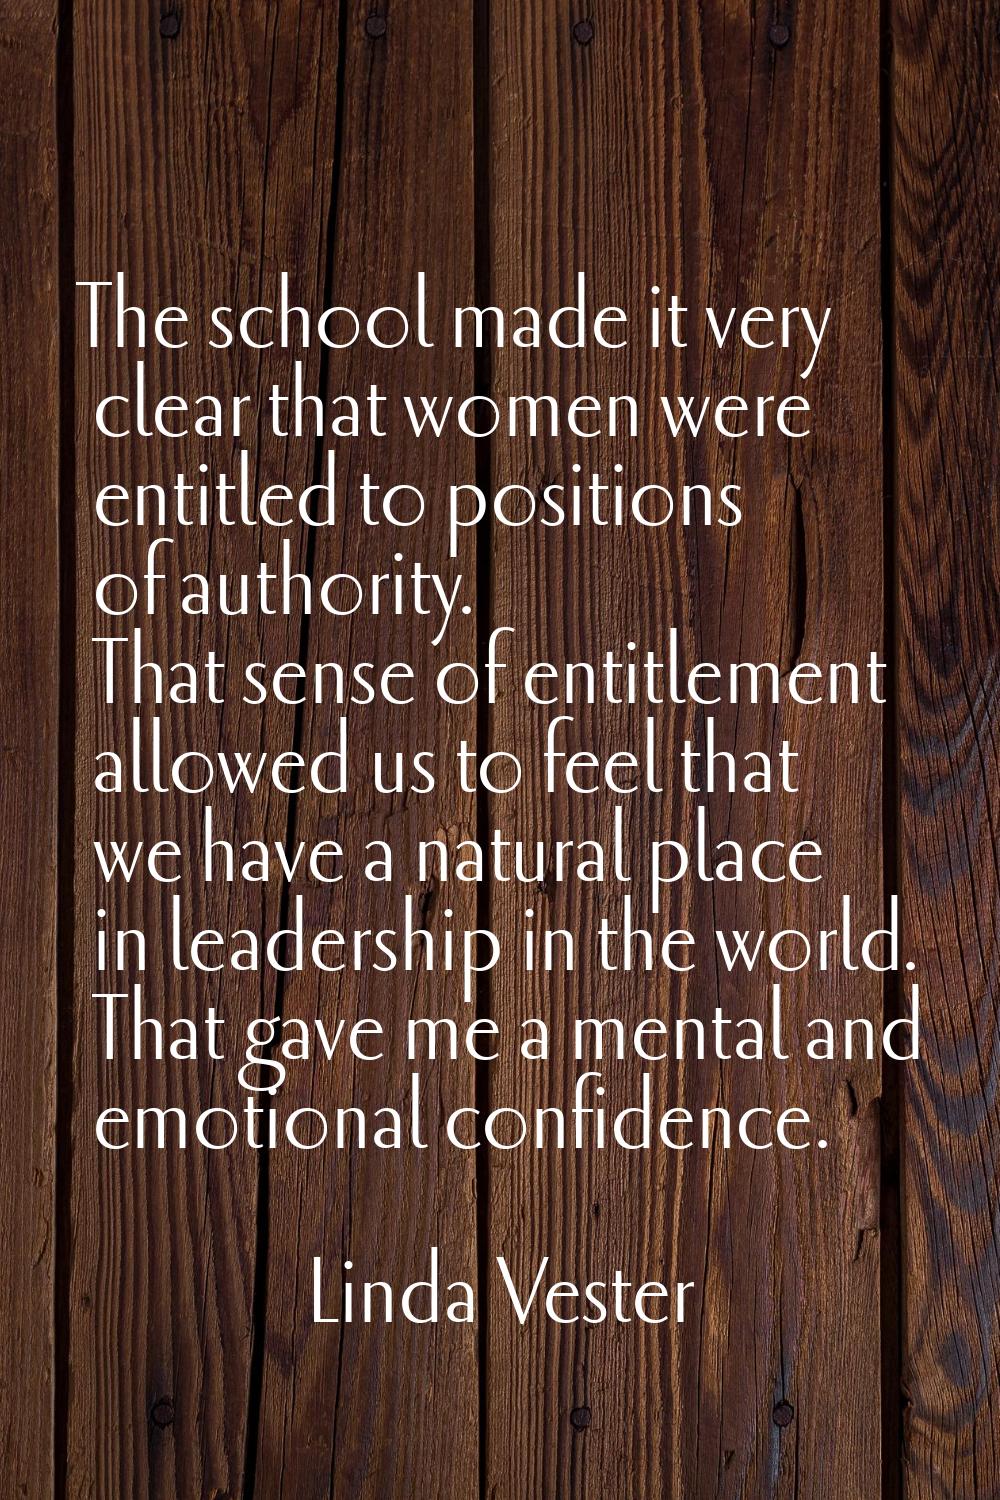 The school made it very clear that women were entitled to positions of authority. That sense of ent